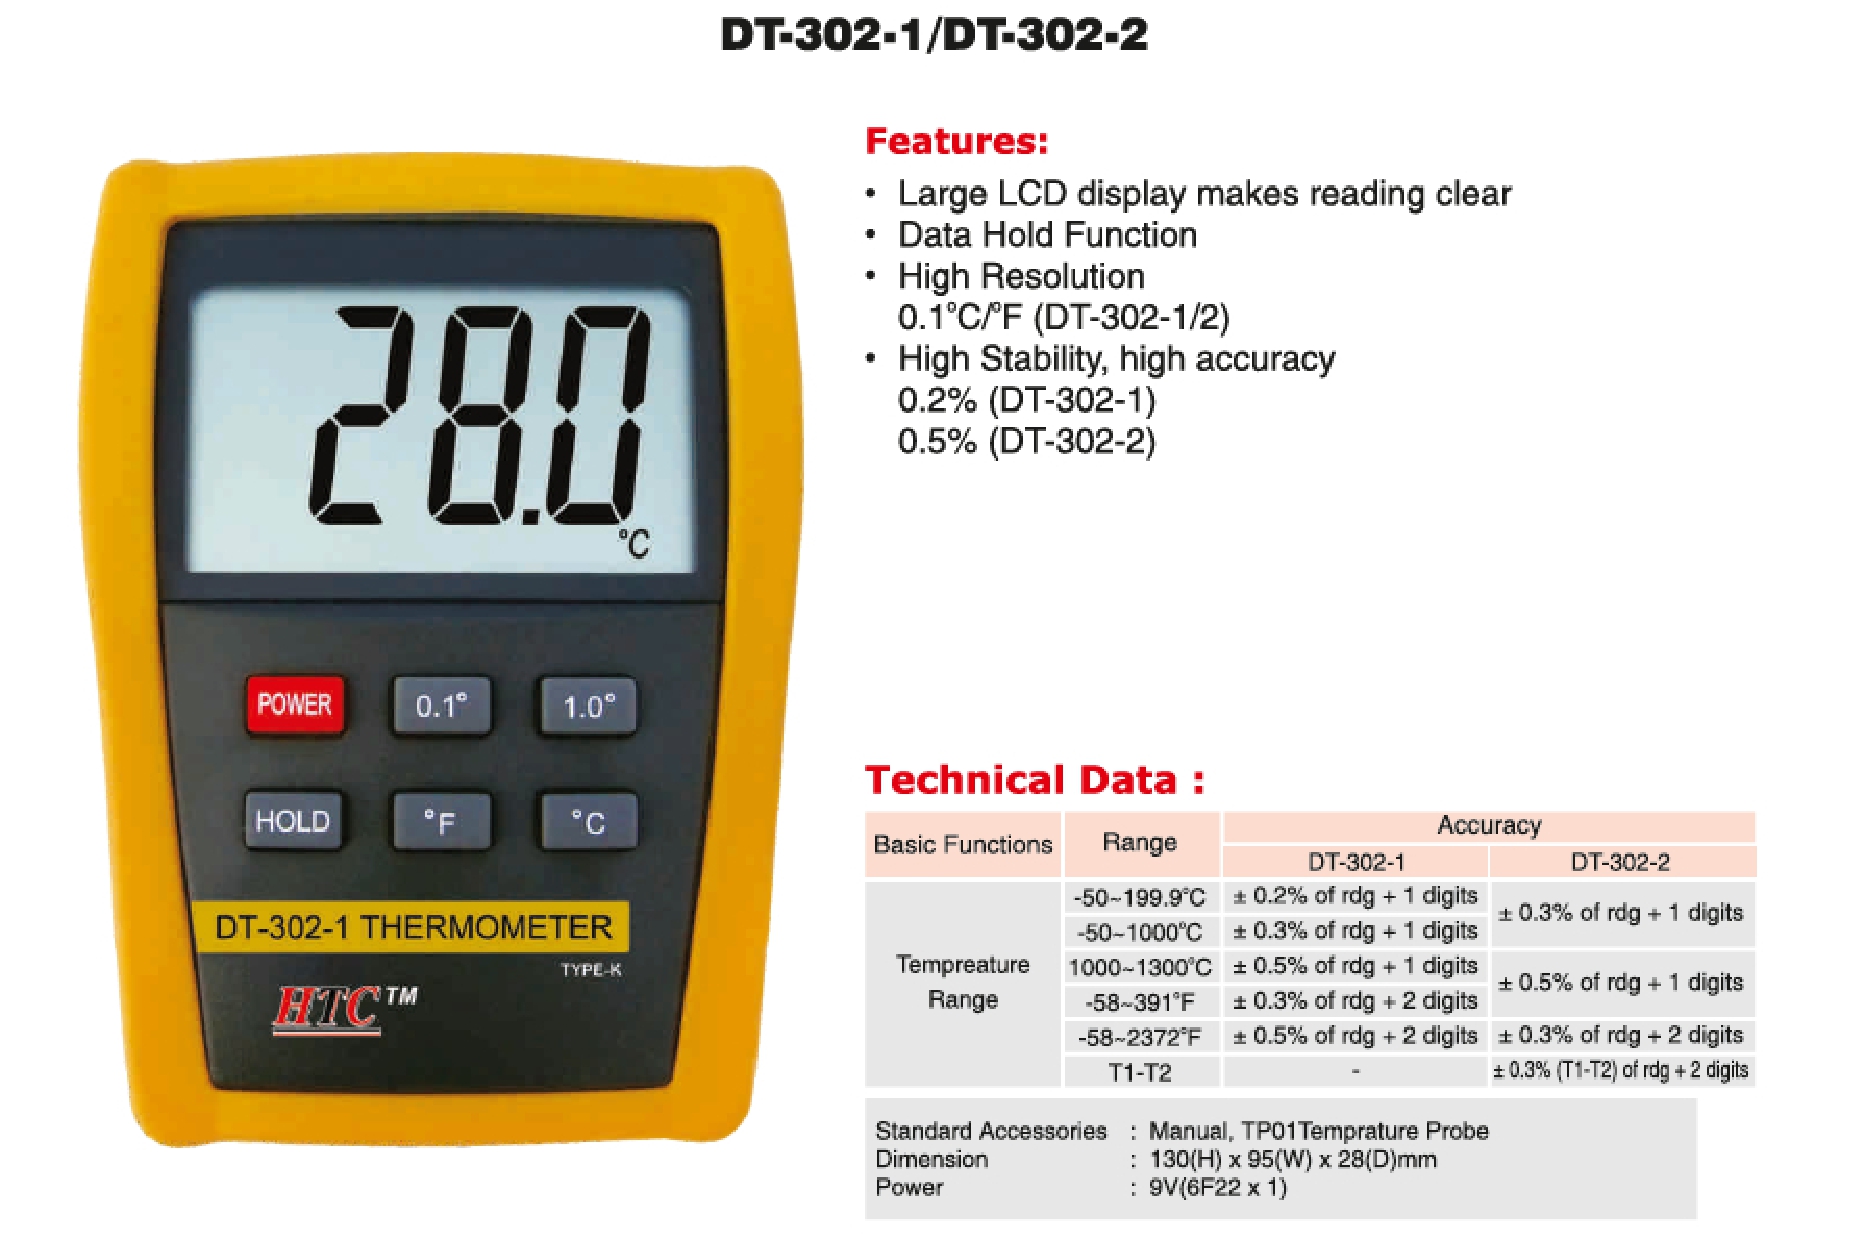 HTC DT-302-2 Digital Thermometer (Dual Input)